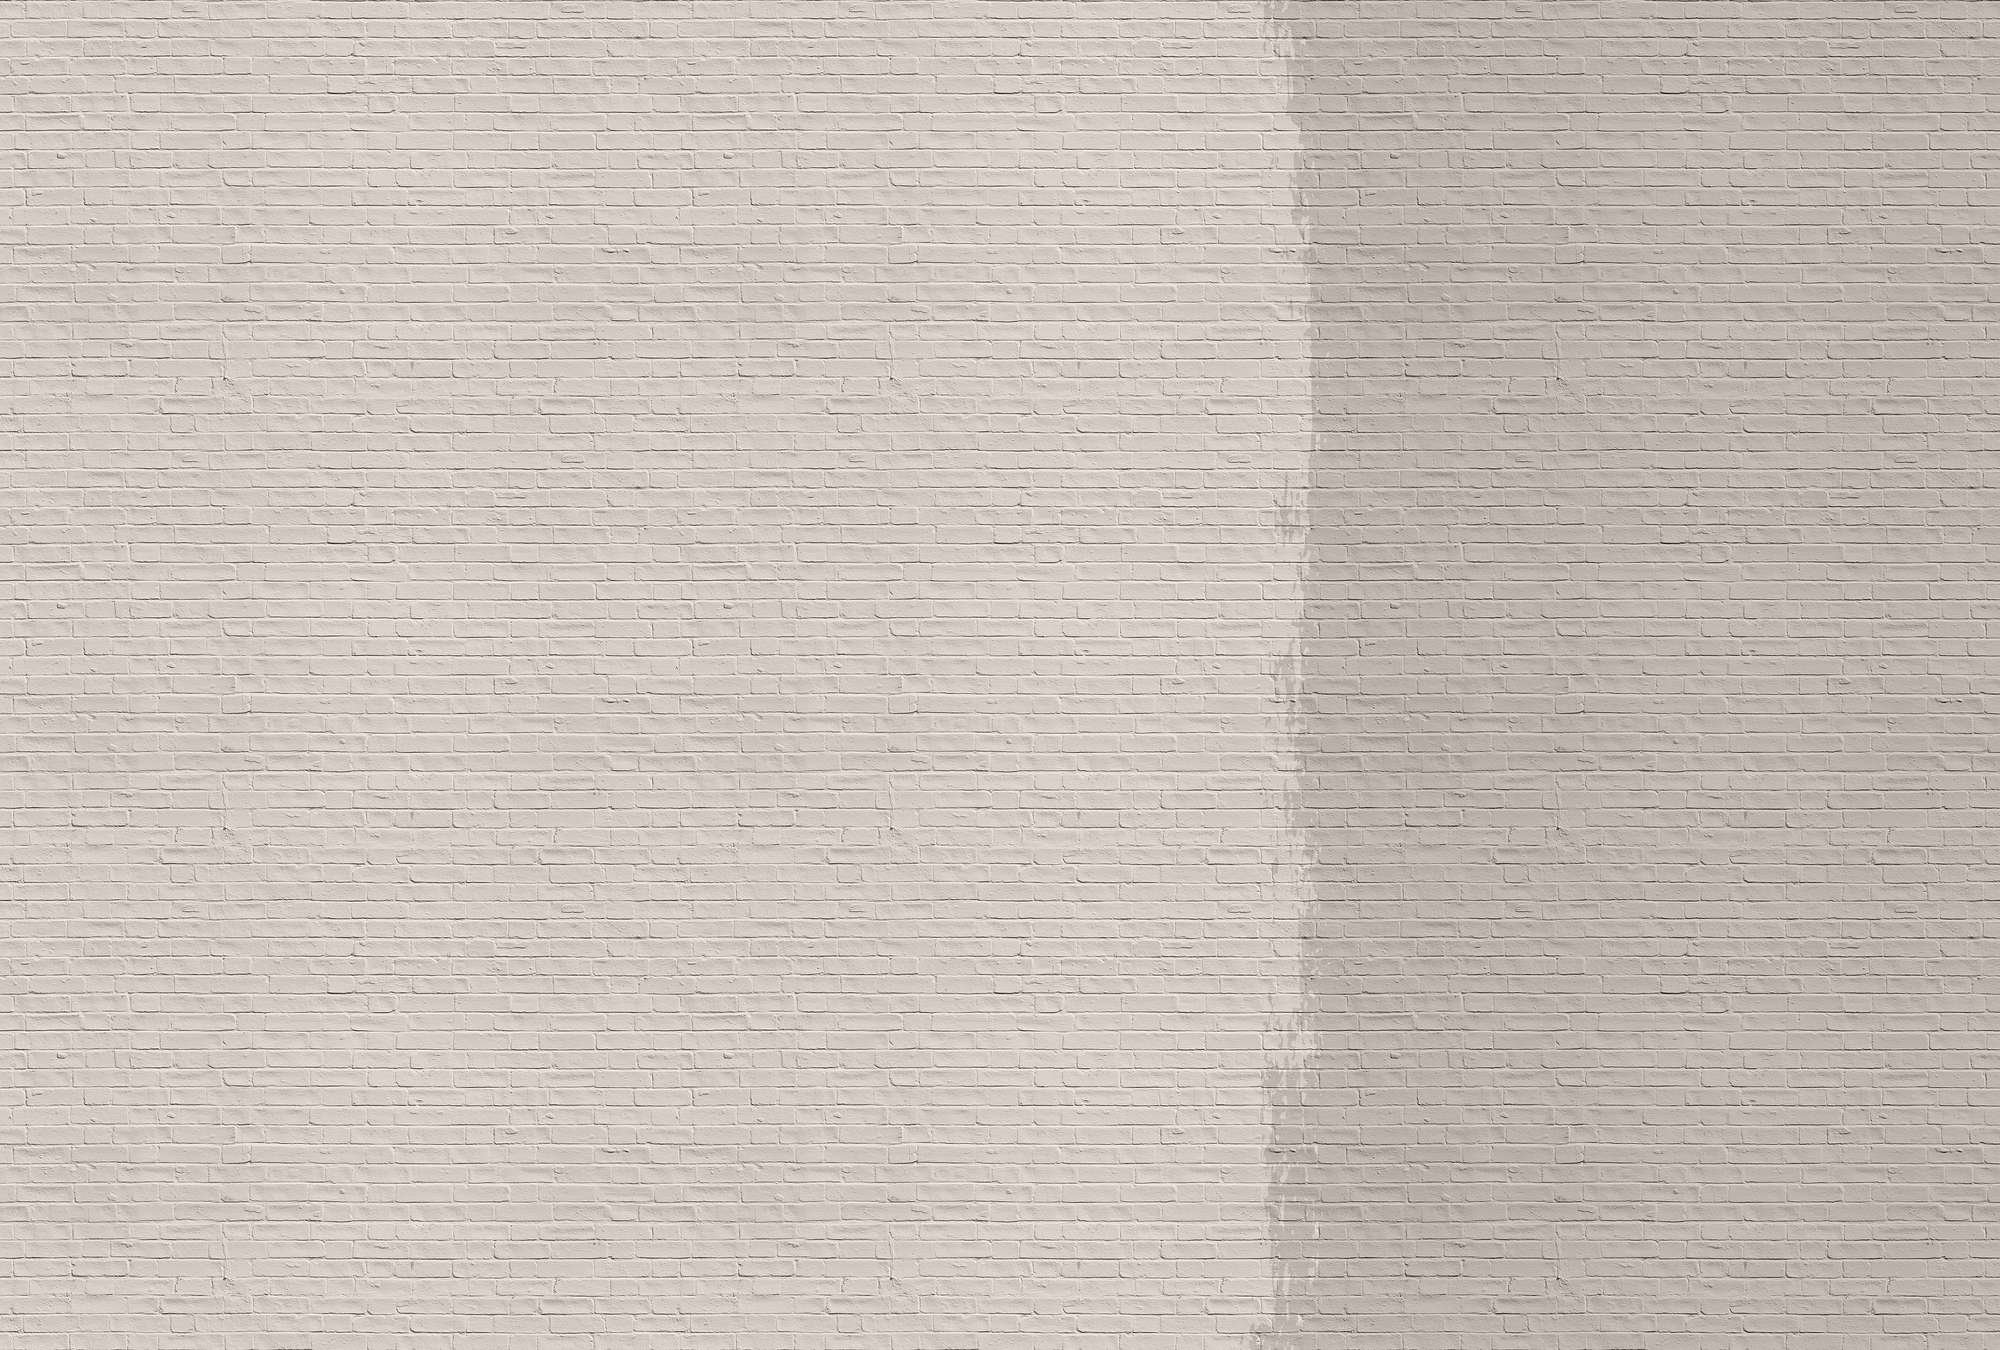             Tainted love 1 - Brick Wall Wallpaper painted - Beige, Taupe | Textured Non-woven
        